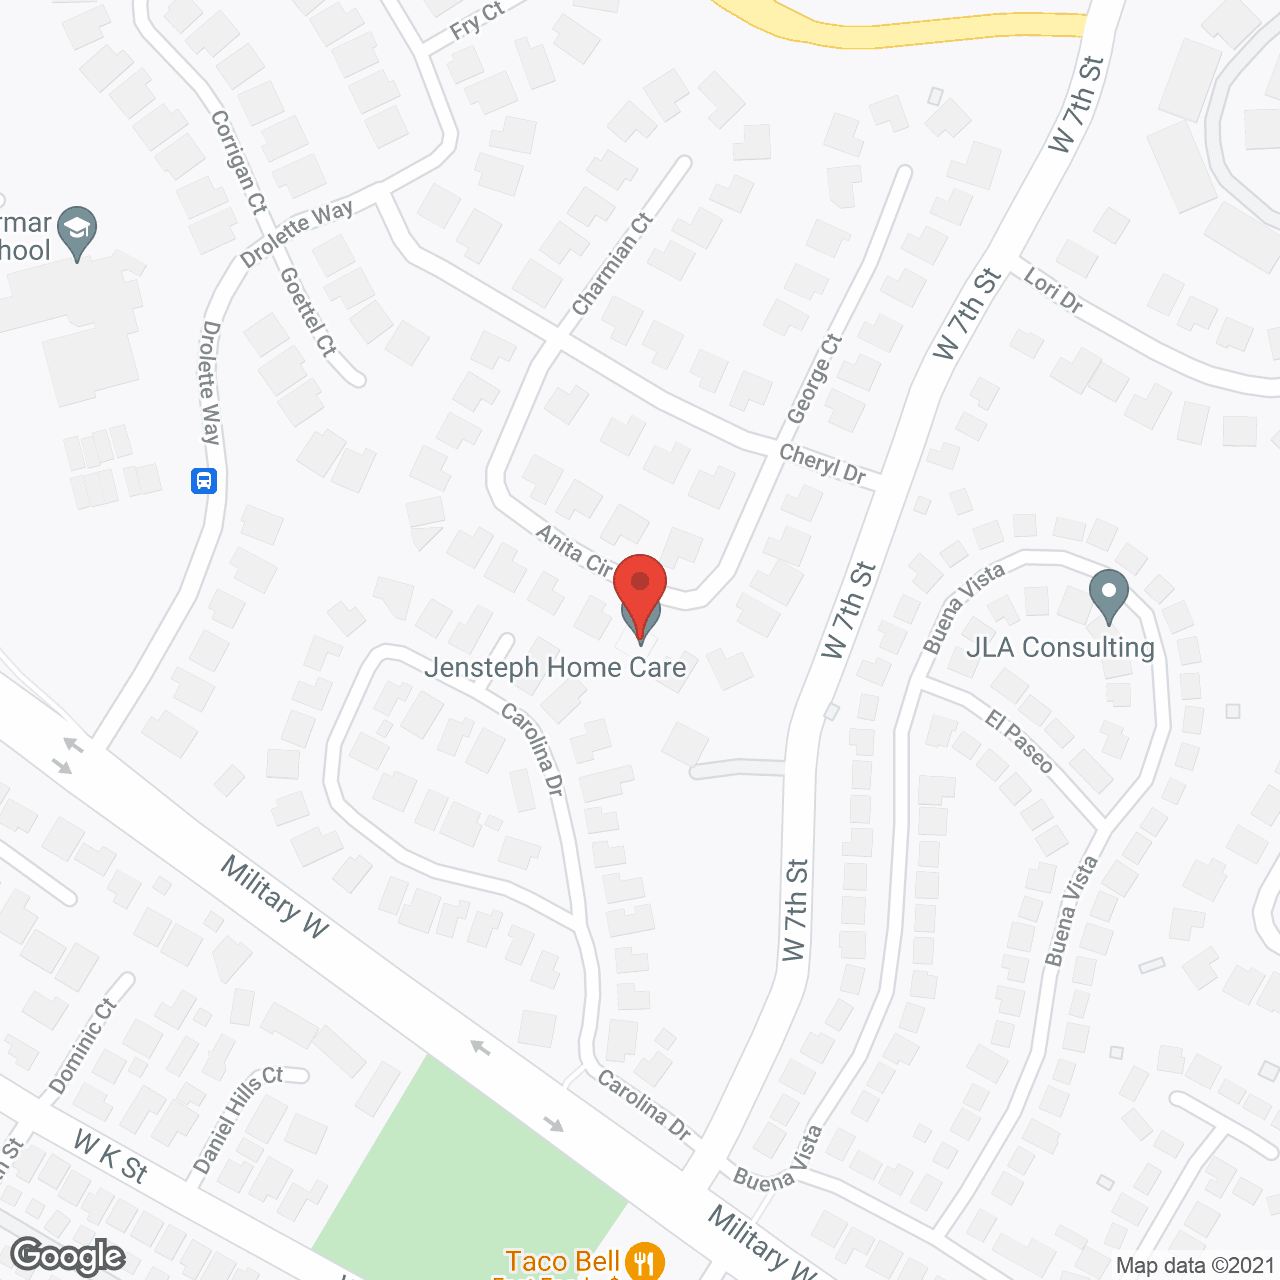 JenSteph Home Care in google map